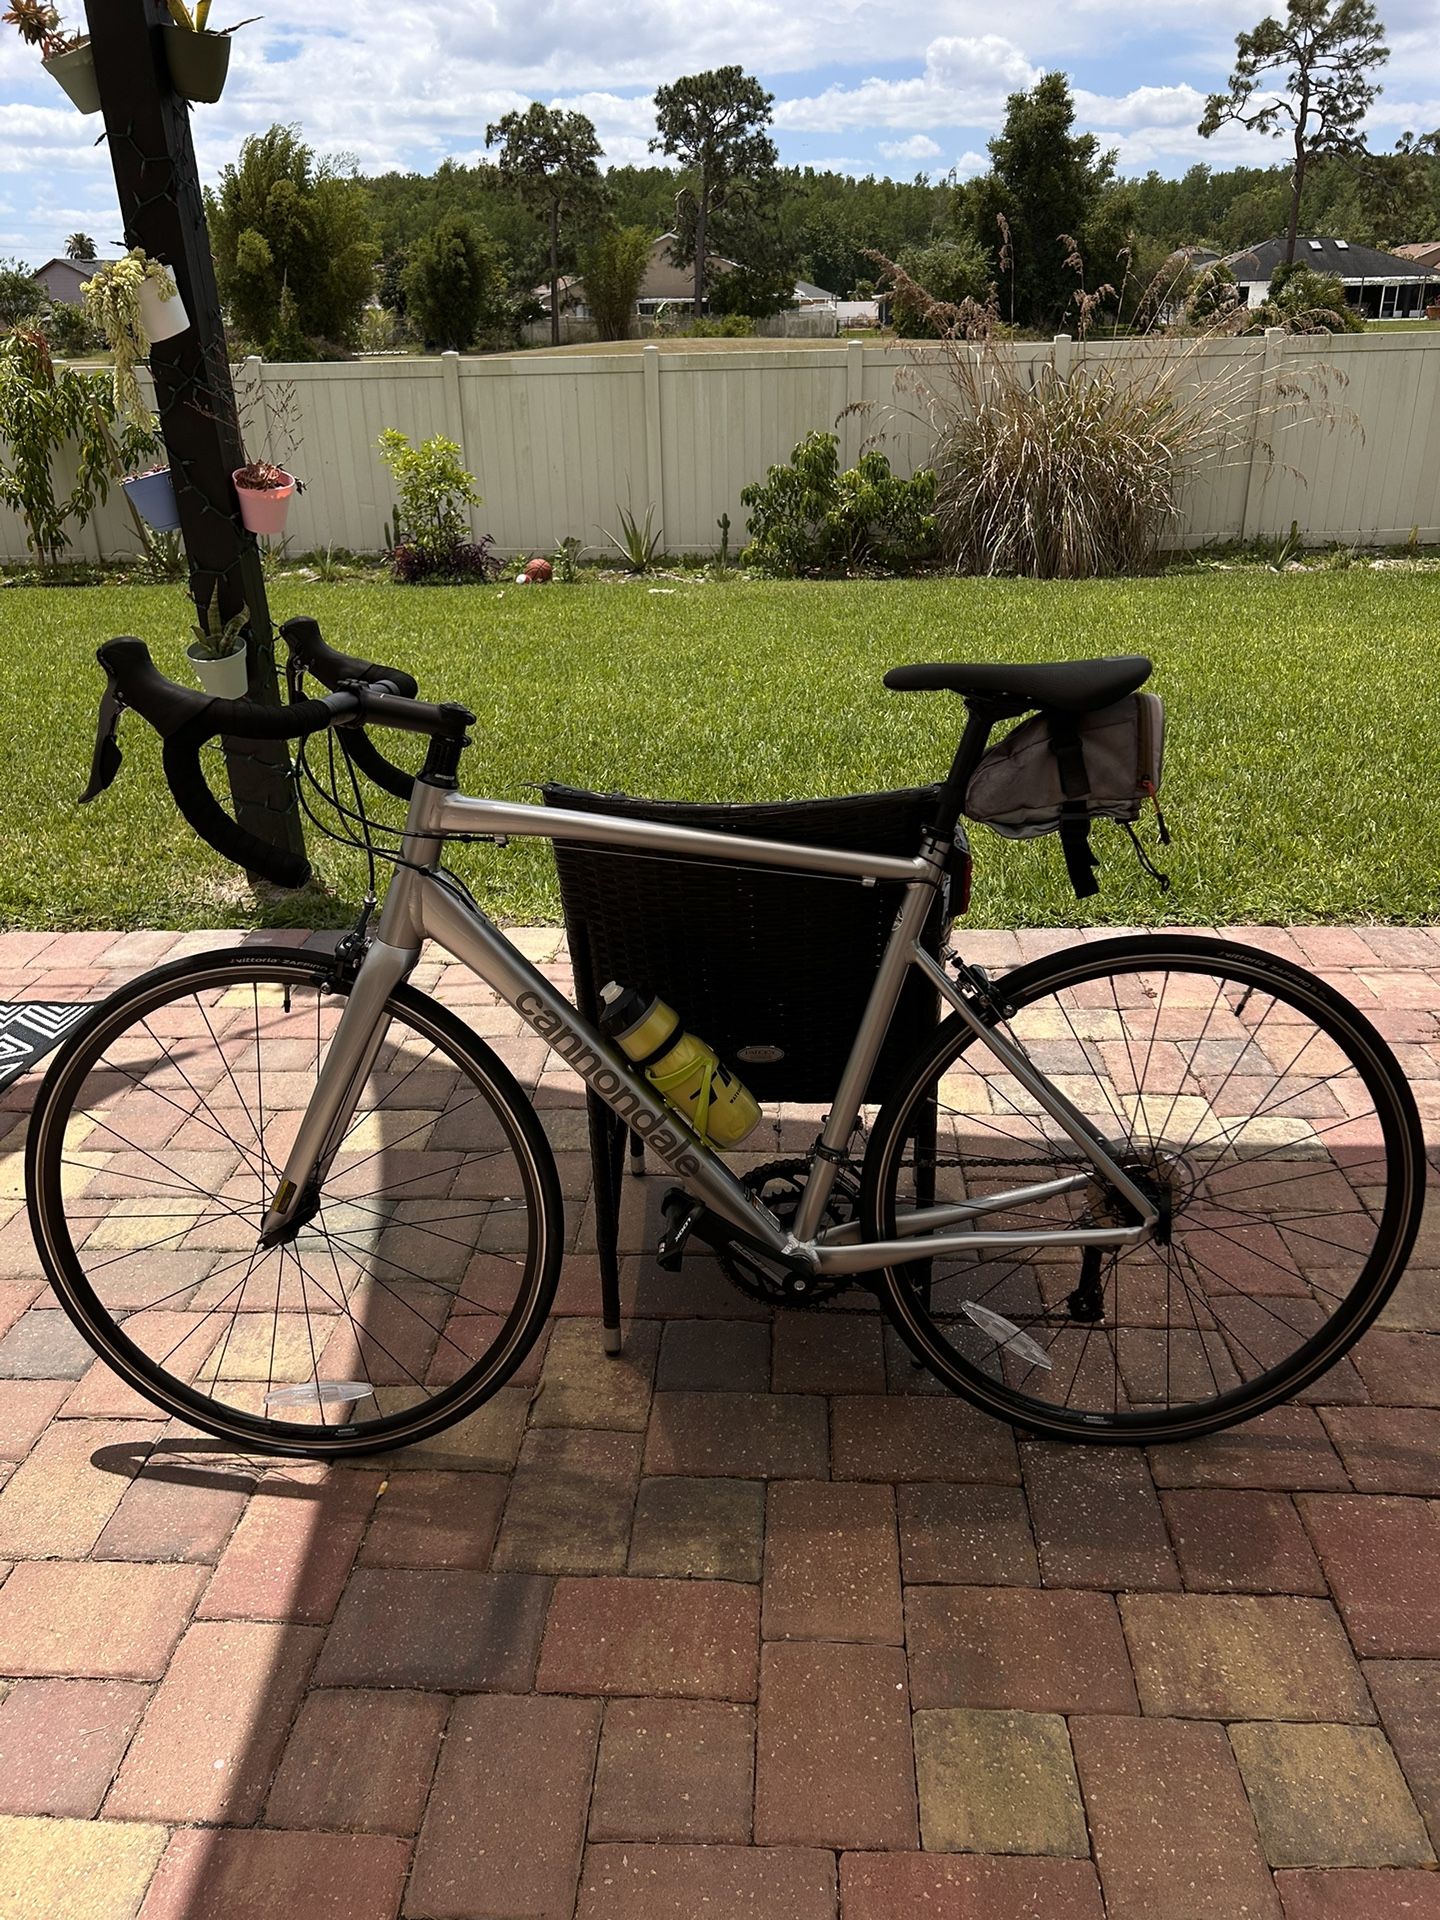 Cannondale CAAD Optimo 4 Bike (Size 58) - Like New - $700 or Best Offer!